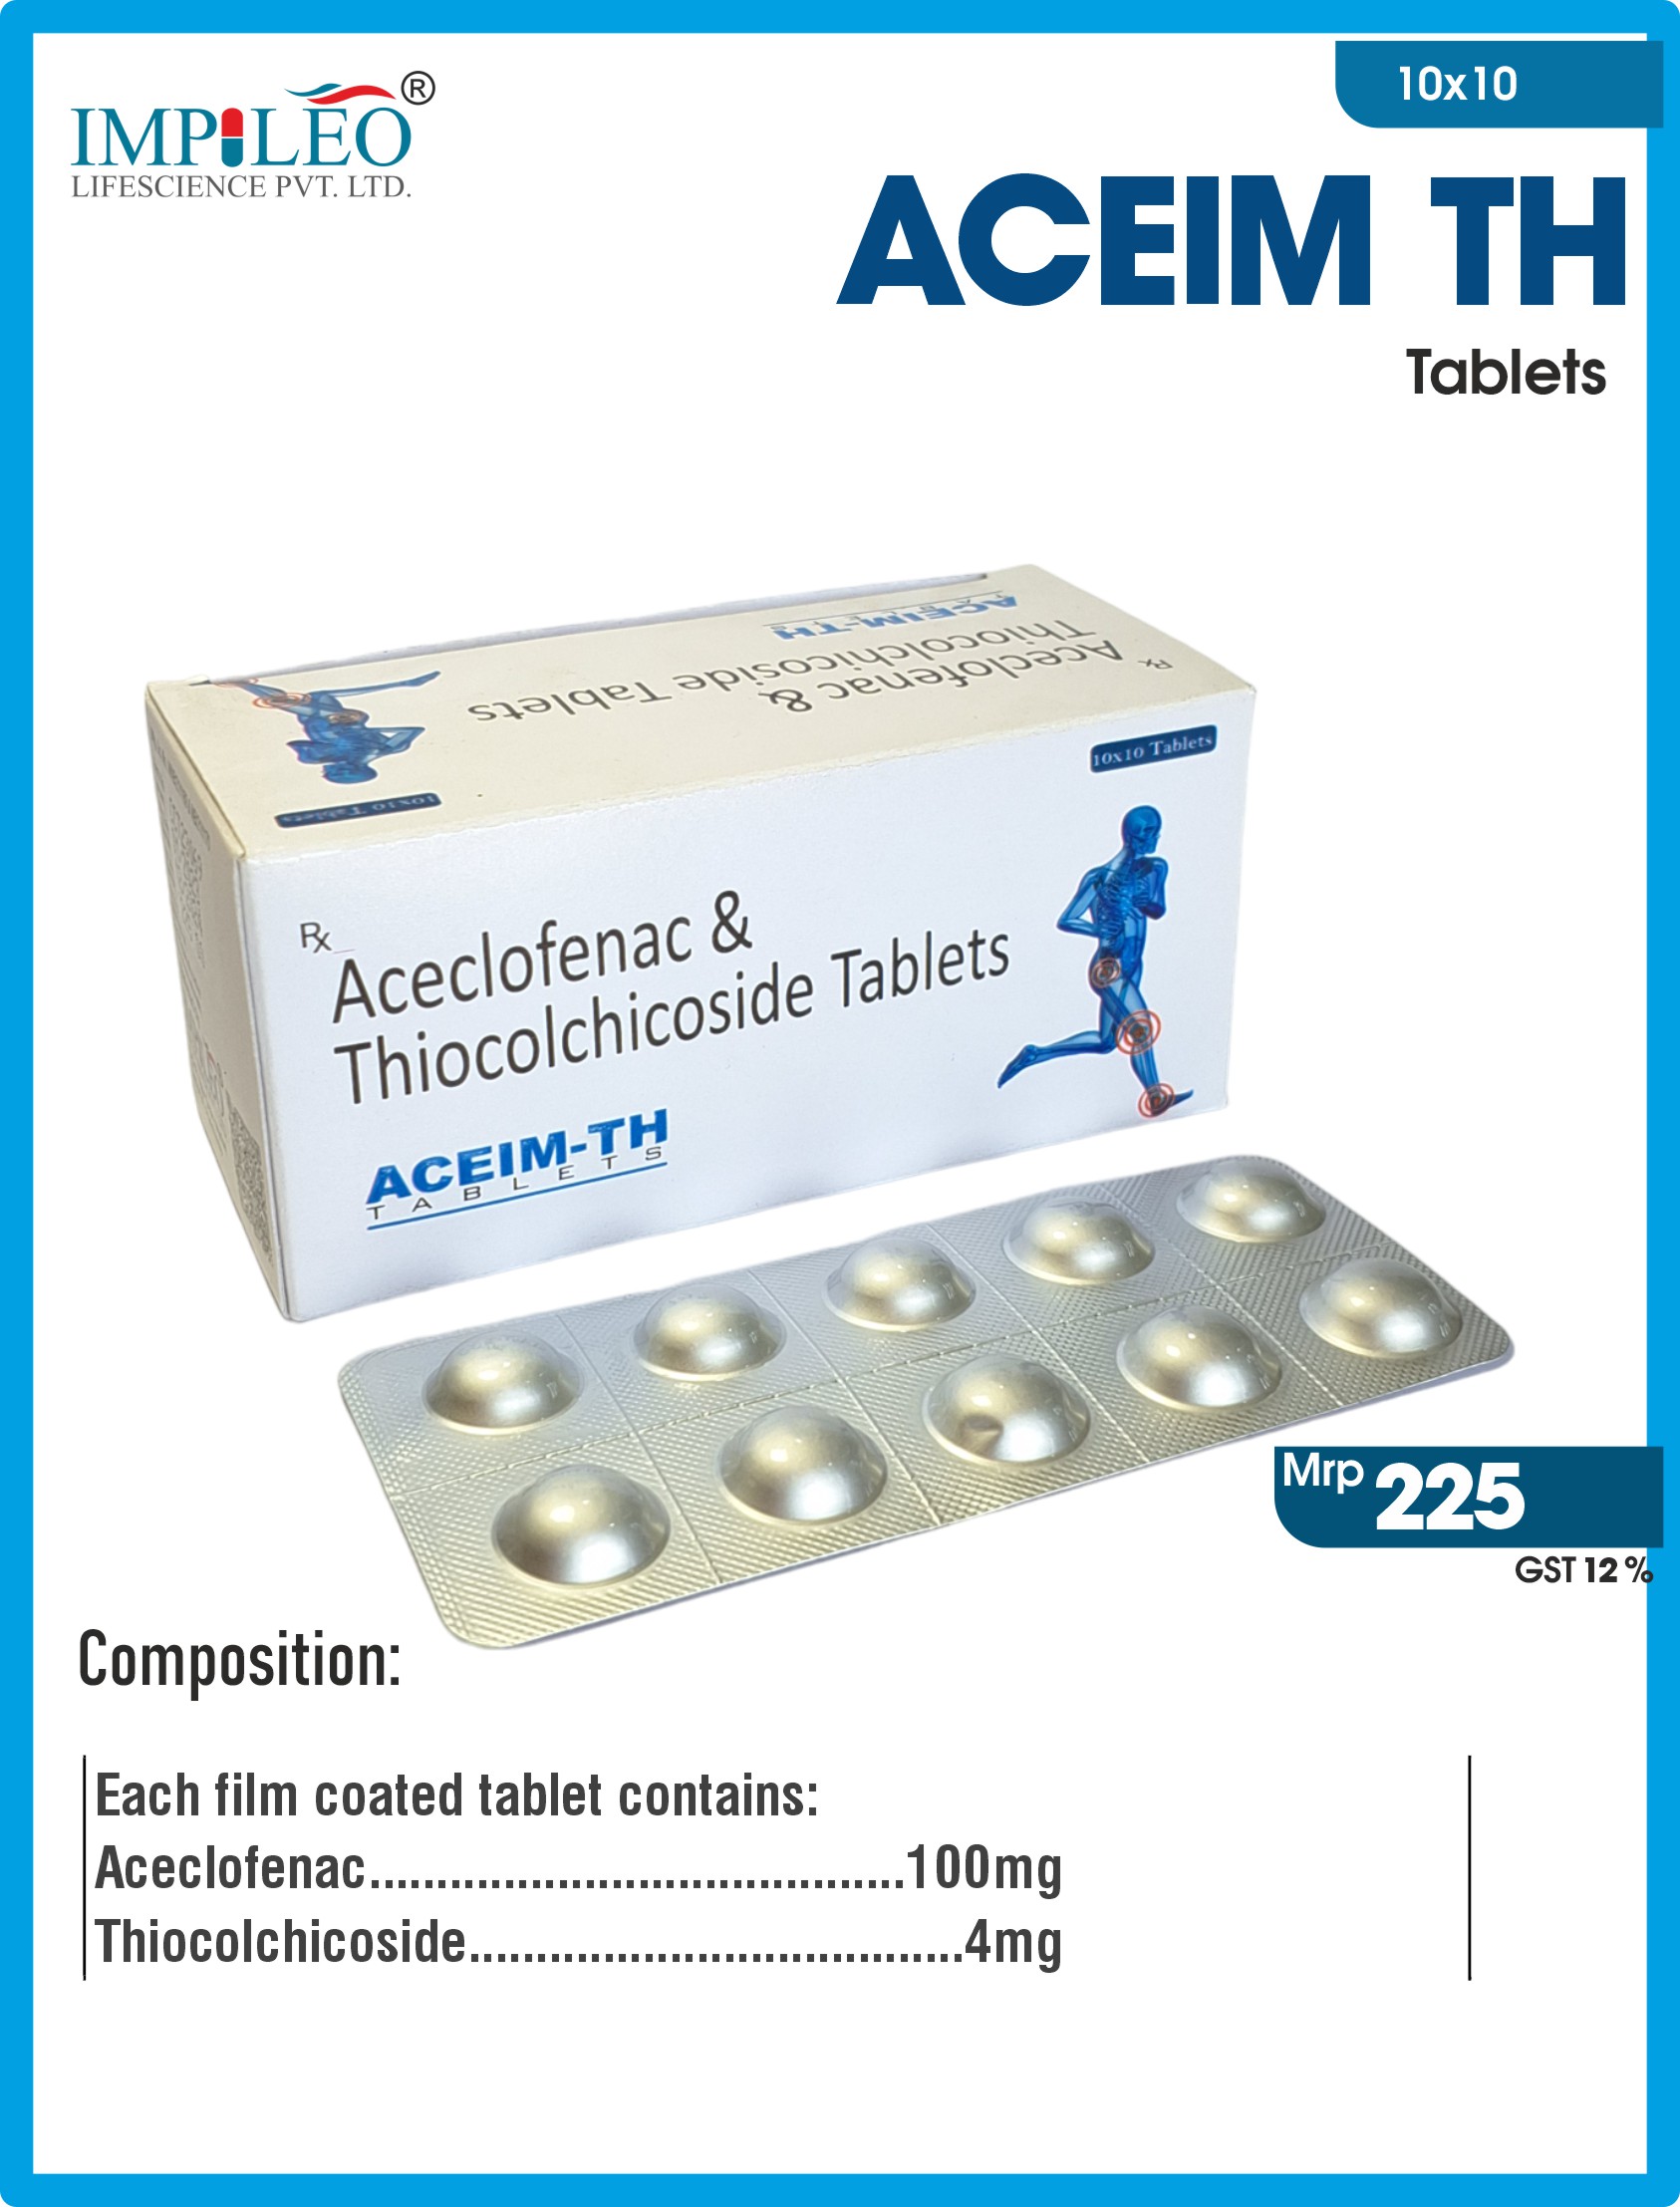 Trusted Third Party Manufacturer in India Provides ACEIM TH (Aceclofenac and Thiocolchicoside) Tablets